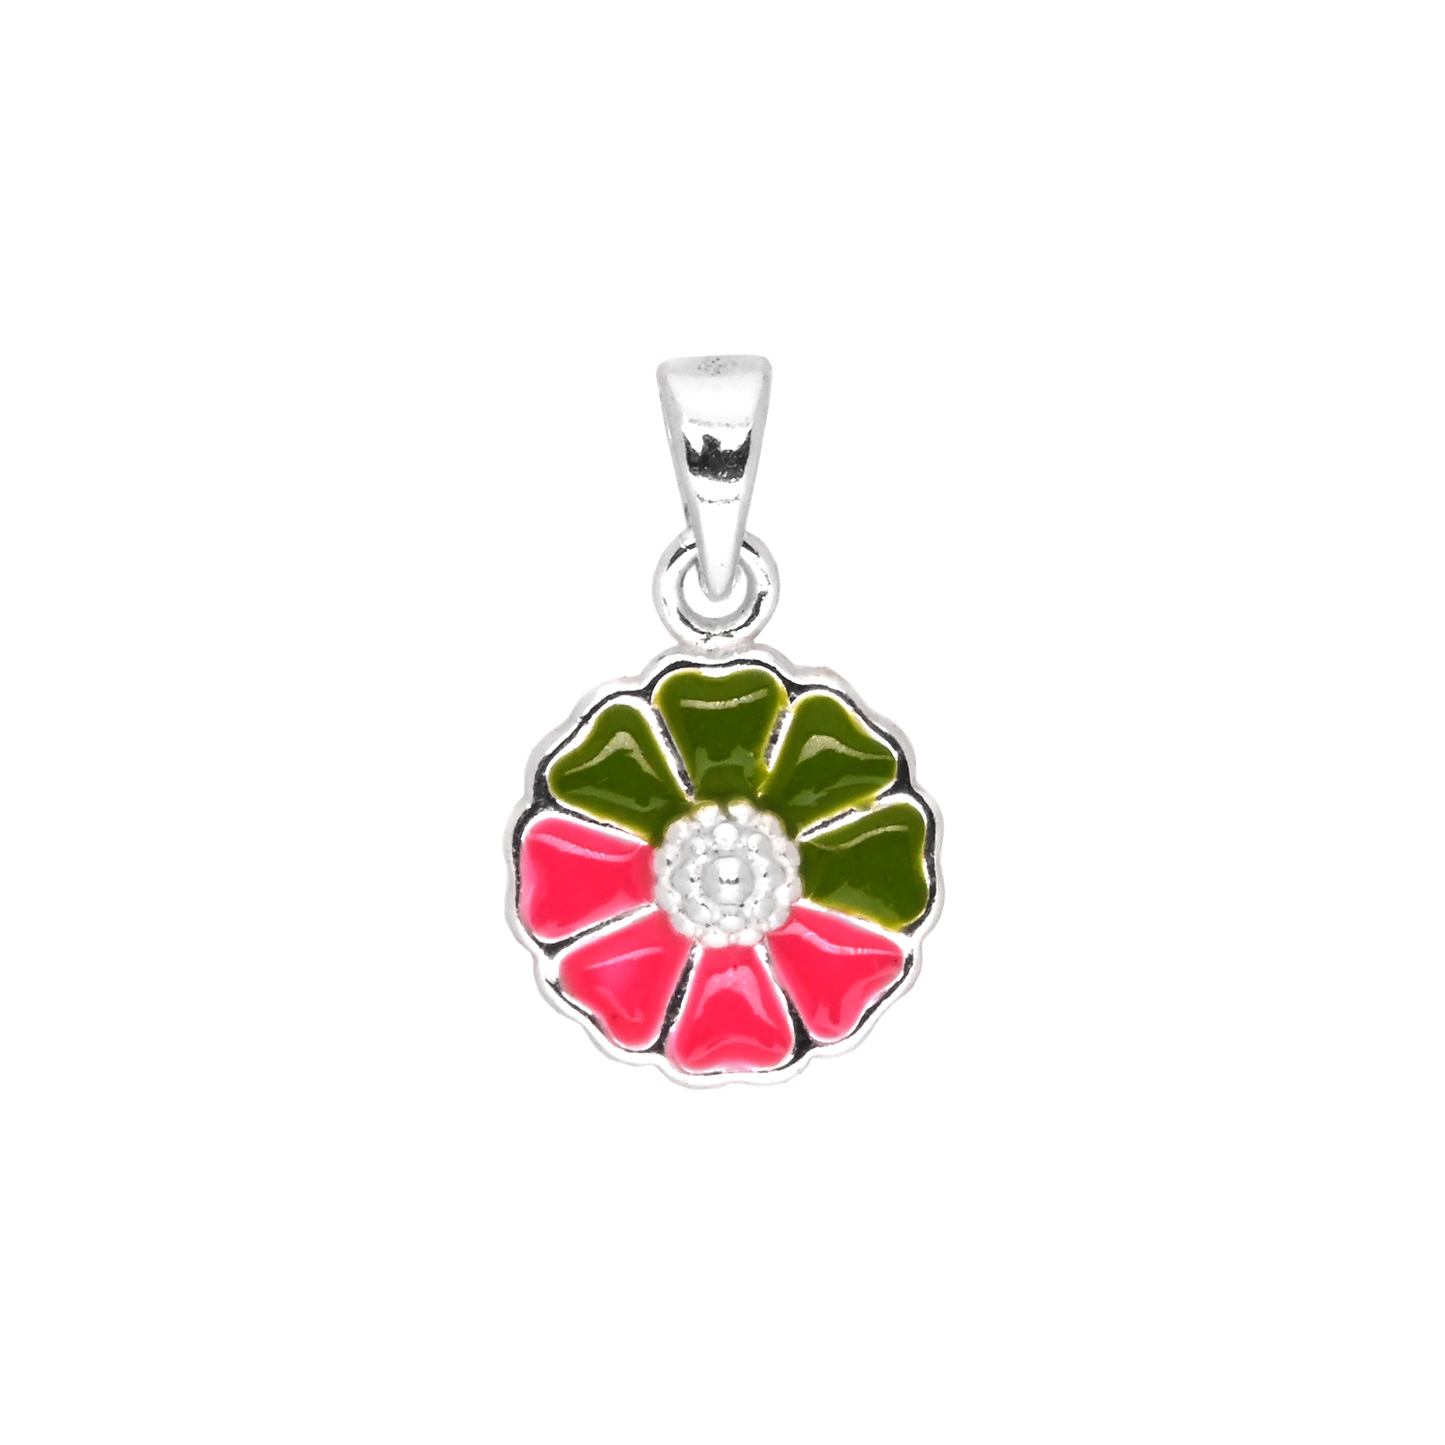 Ontique 925 Silver Striped Round Shaped Pendant For Women